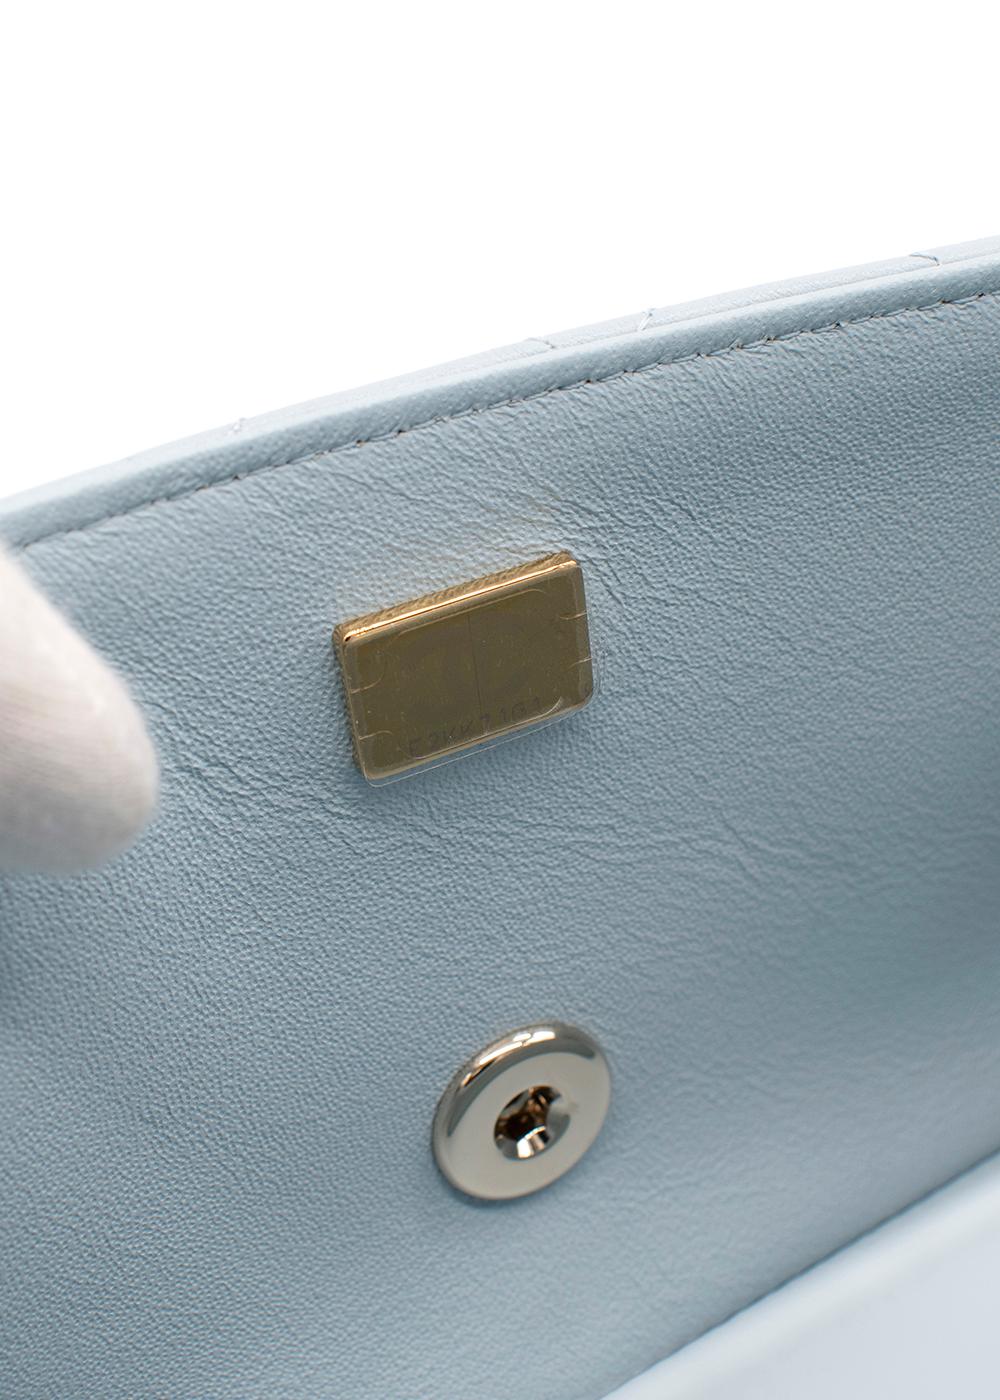 Chanel Sky Blue Leather Quilted Mini Top Handle Flap Bag For Sale 4